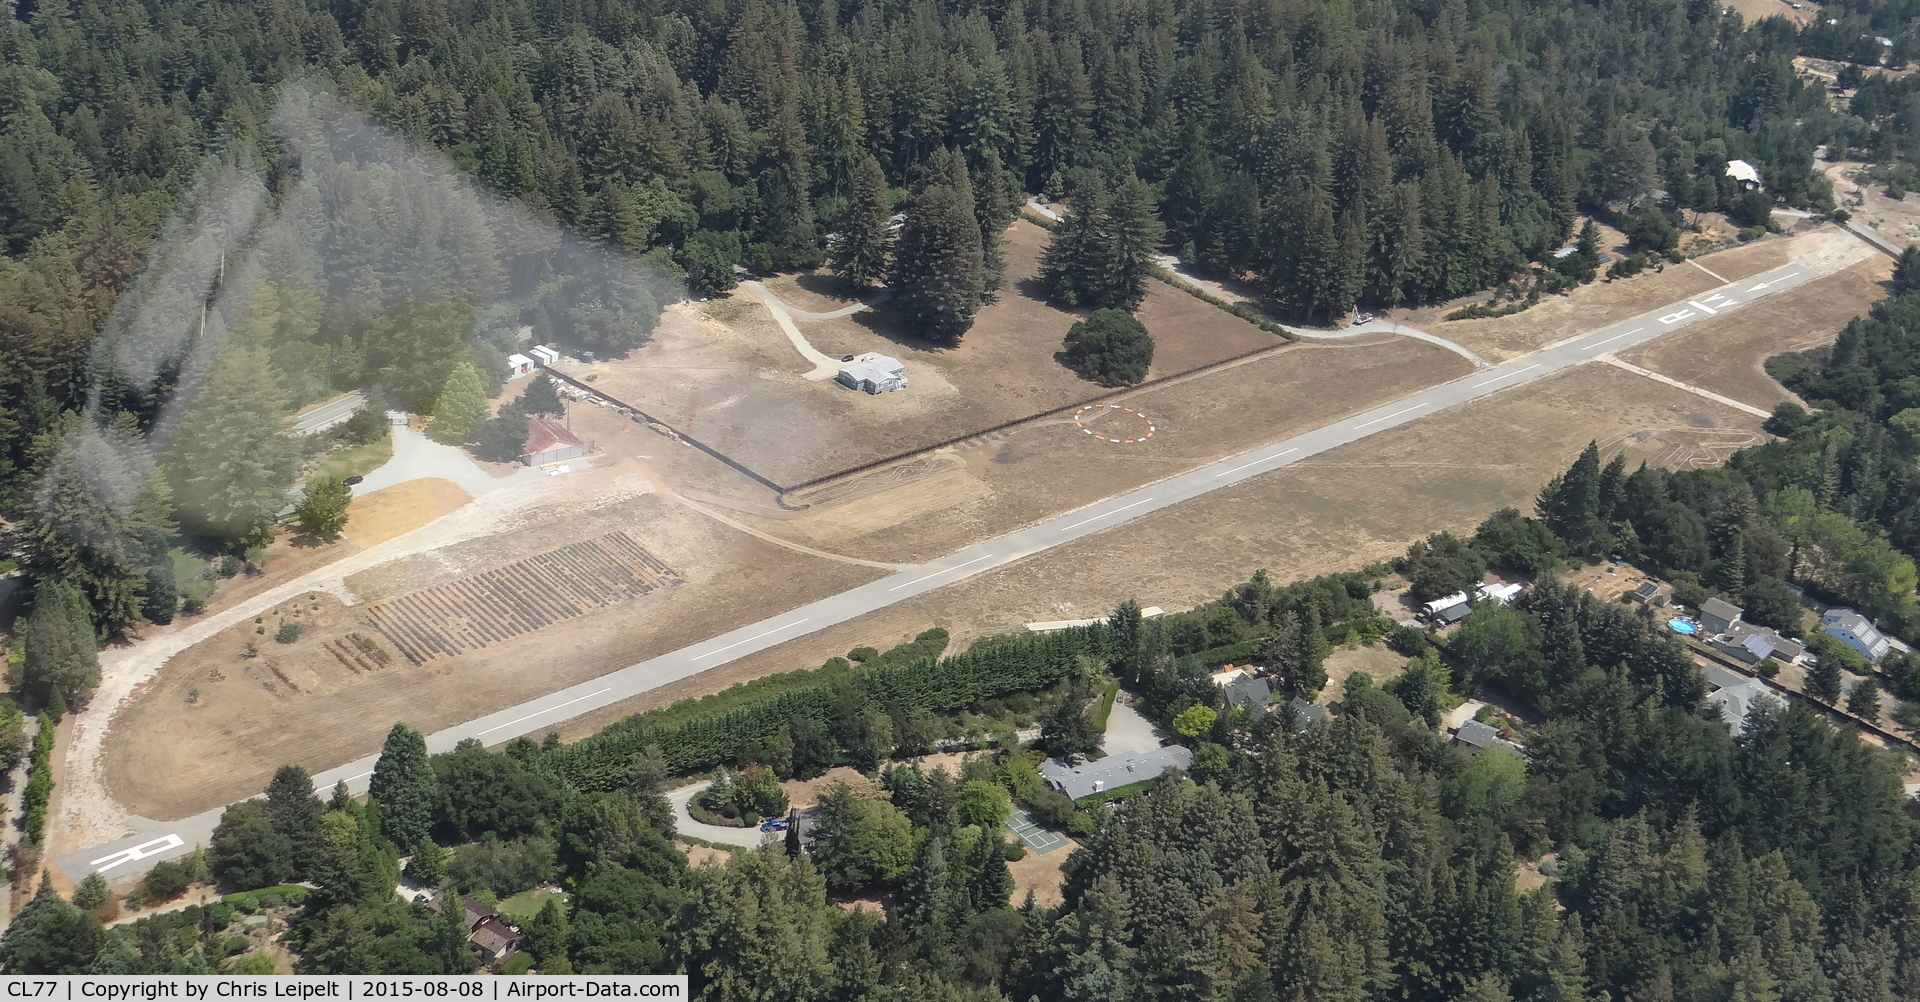 Bonny Doon Village Airport (CL77) - An overview of Bonny Doon Village Airport, CA from a Diamond Star DA-40.